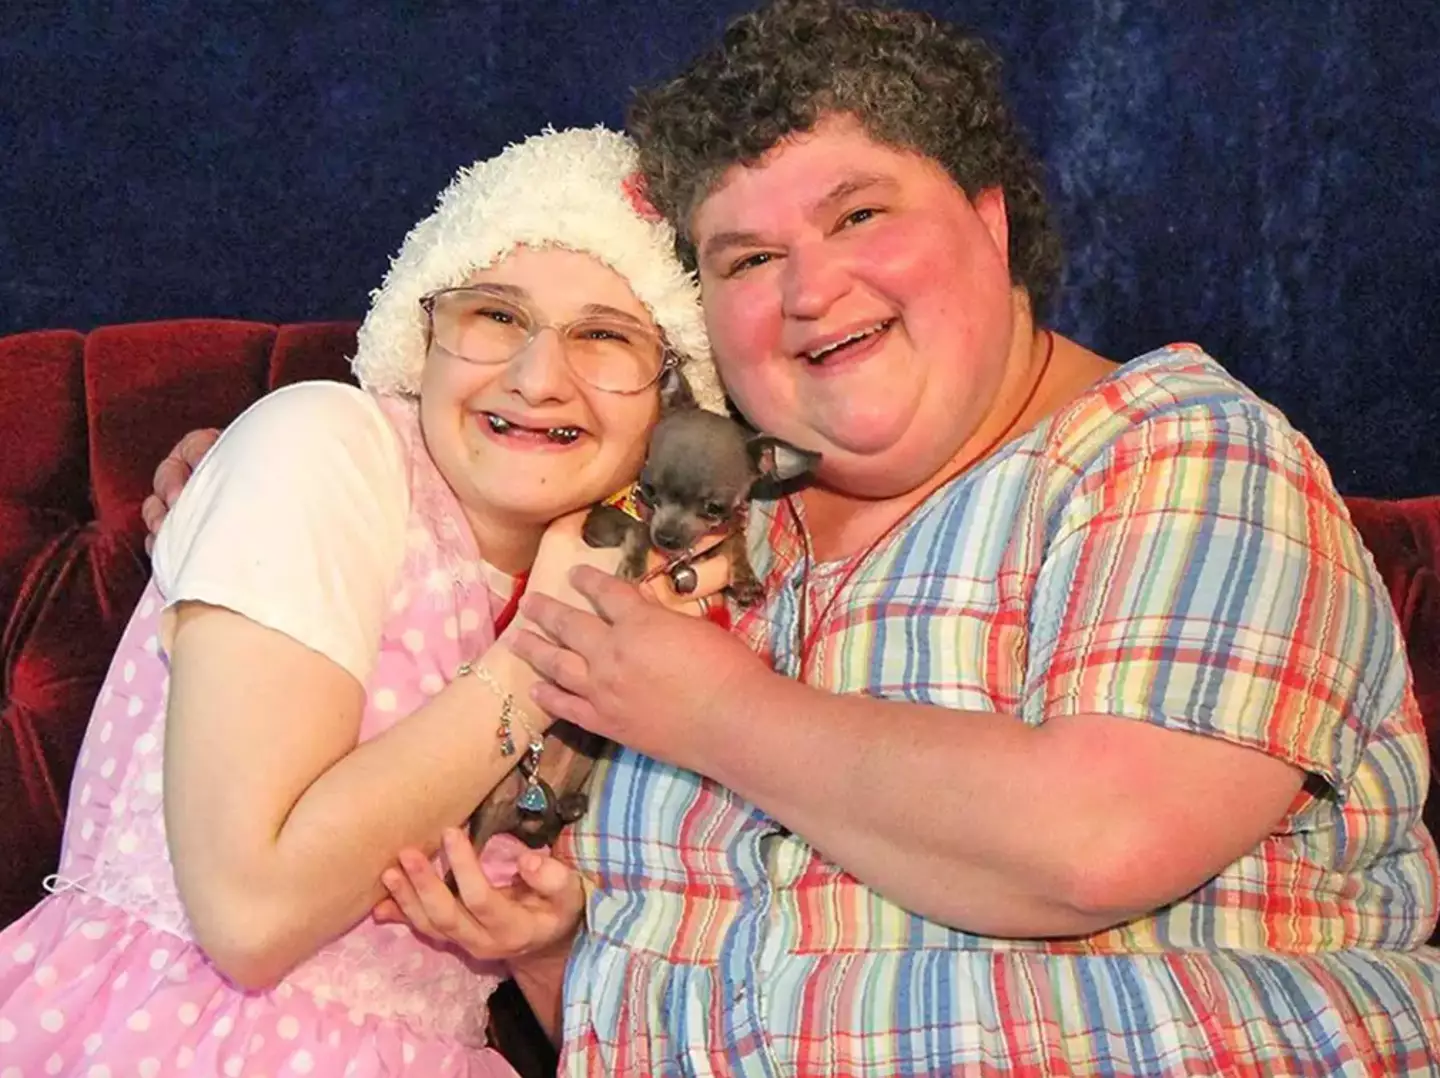 Gypsy Rose Blanchard's mother claimed her daughter was terminally ill.